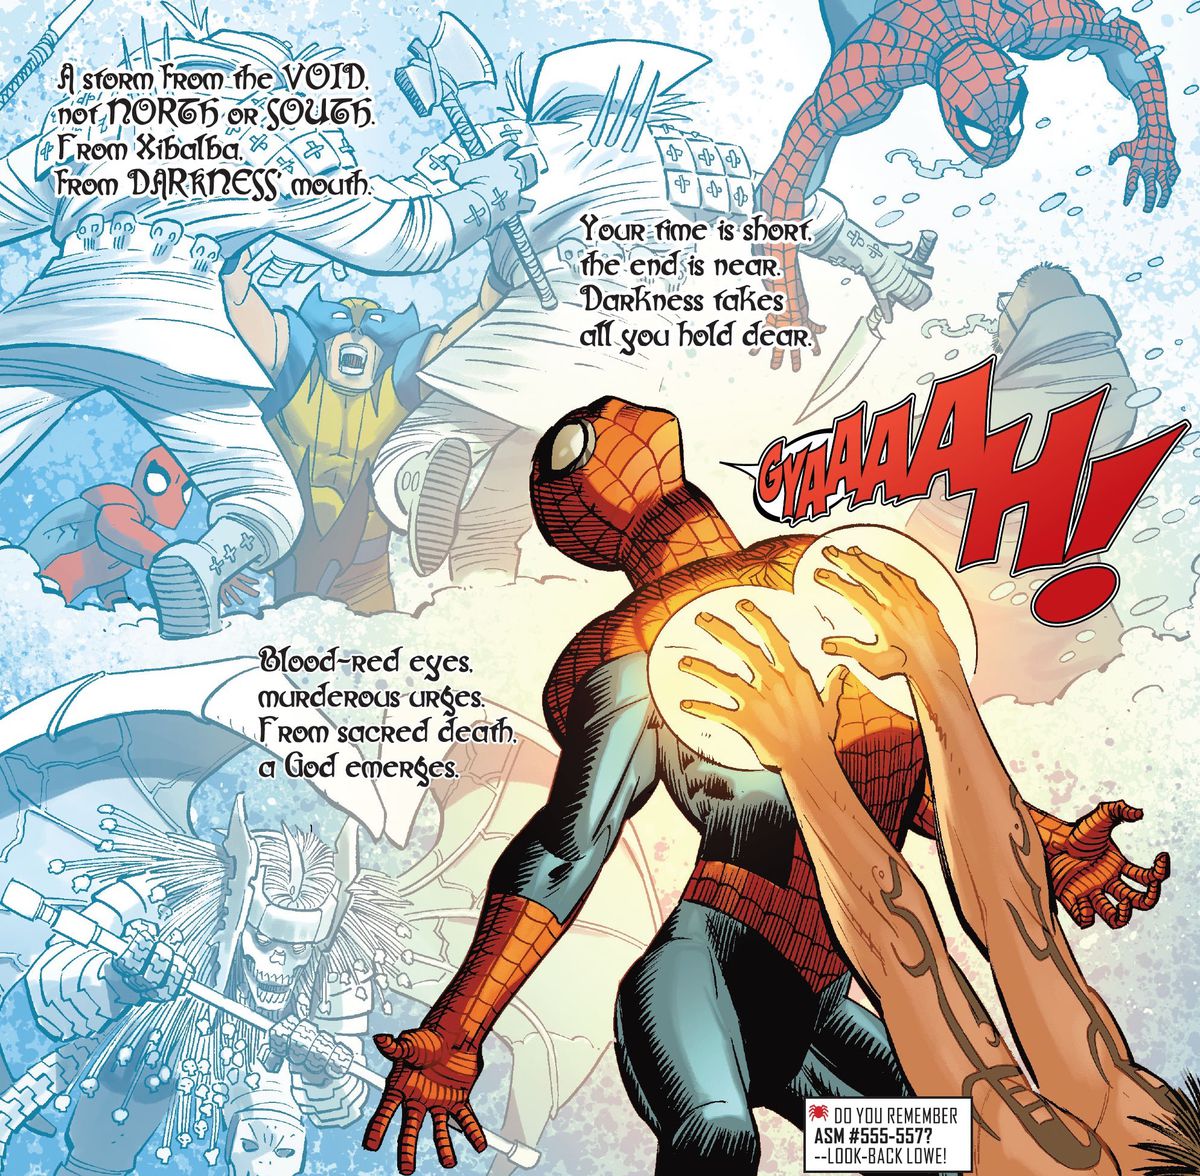 Rhyming couplets abound over images of Spider-man’s previous adventures as a guy with weird tattoos touches his chest with energy-blazing hands in Amazing Spider-Man #21 (2023).